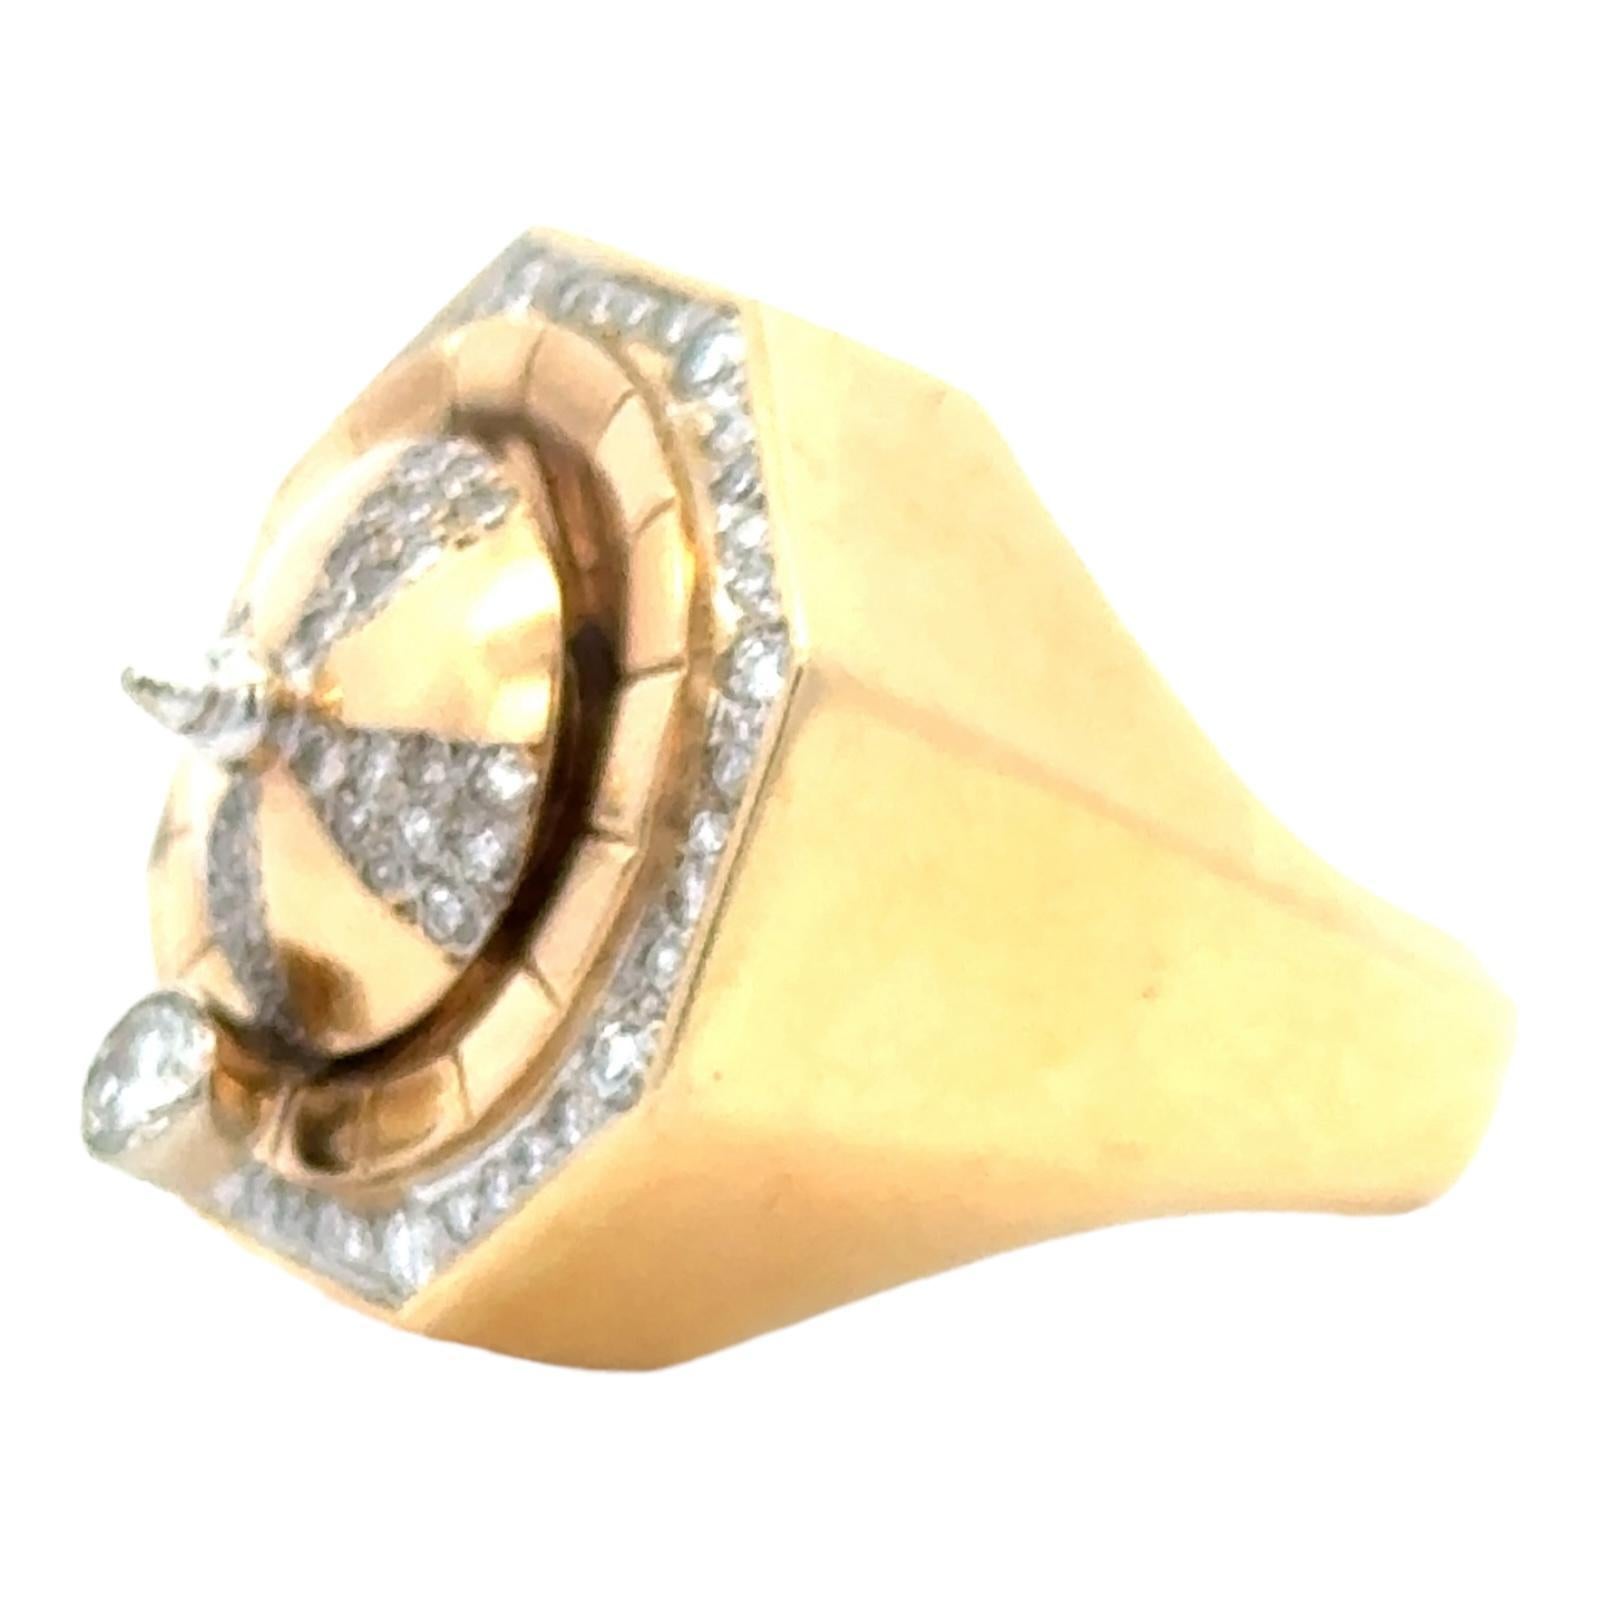 Diamond 18 Karat Yellow Gold Roulette Wheel Spinner Ring Unisex In Excellent Condition For Sale In Boca Raton, FL